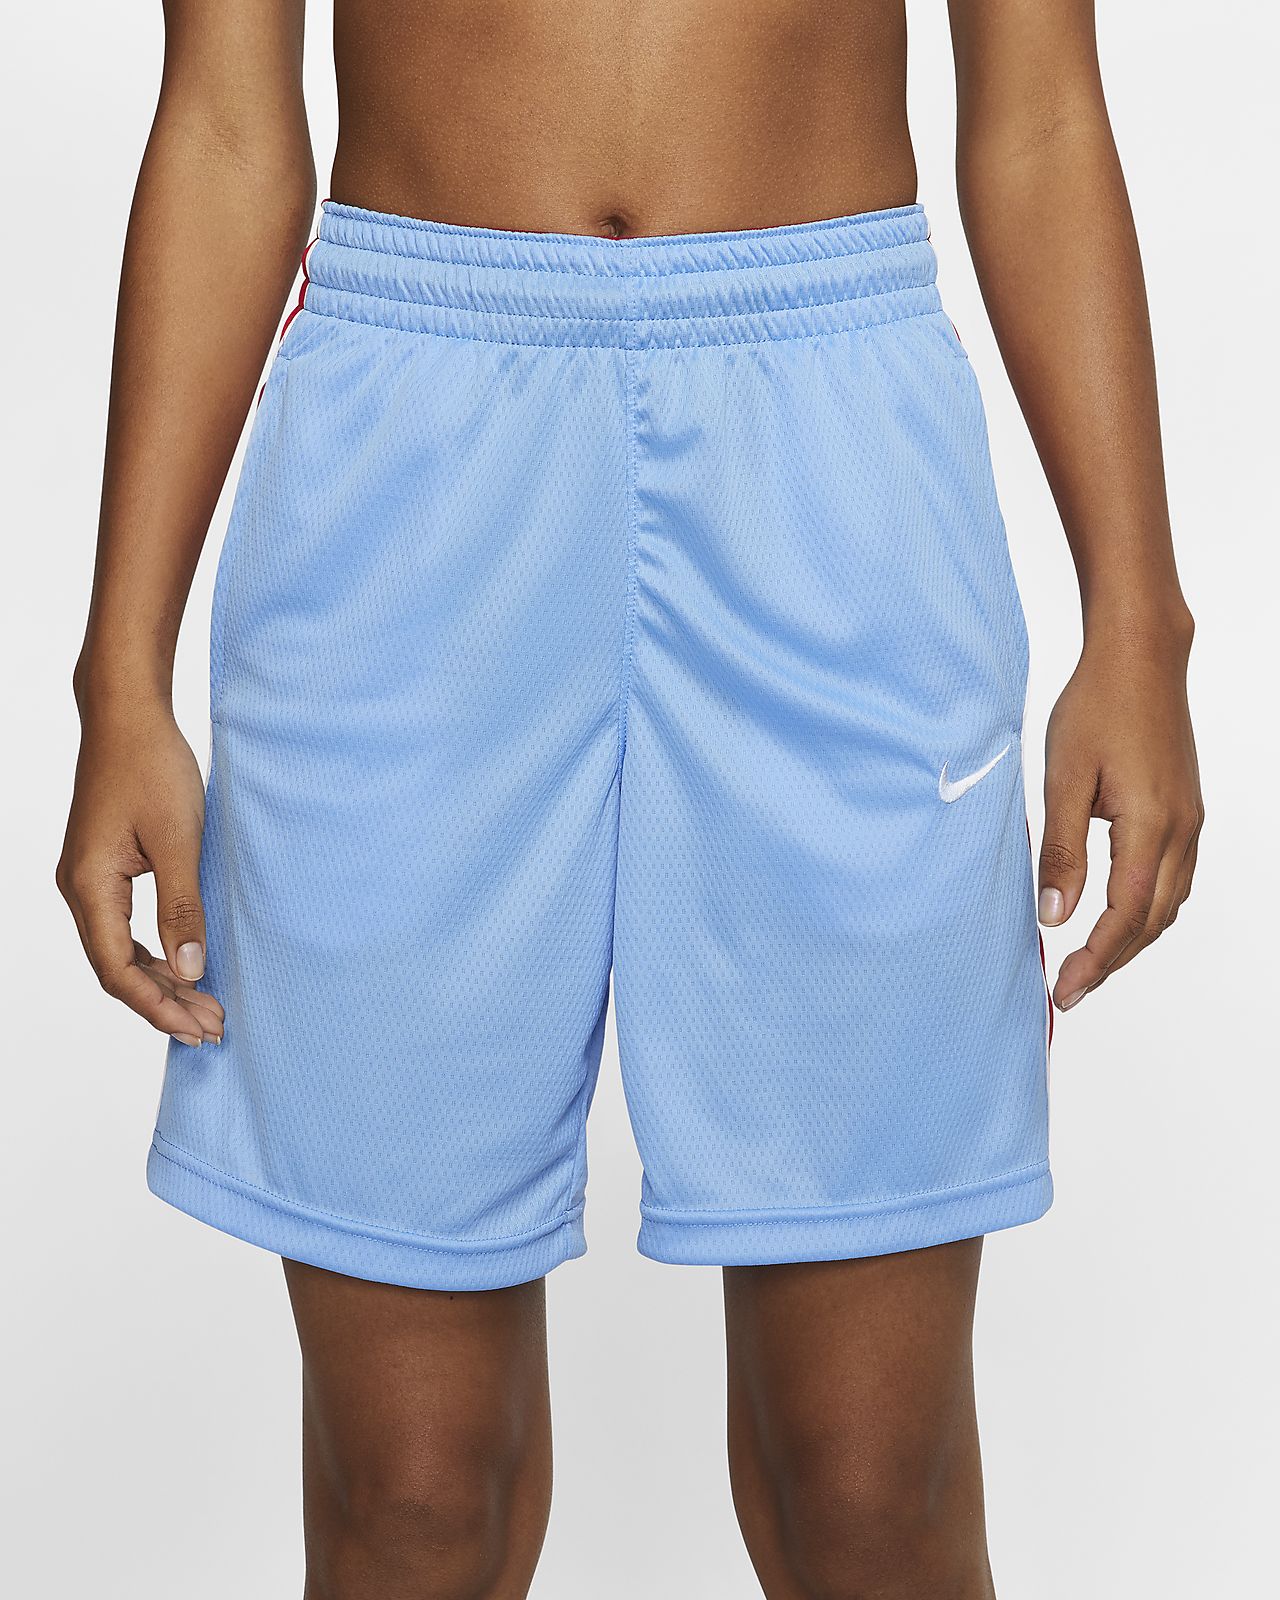 Basketball Shorts / Getting A Good Game With Nike Basketball Shorts ...